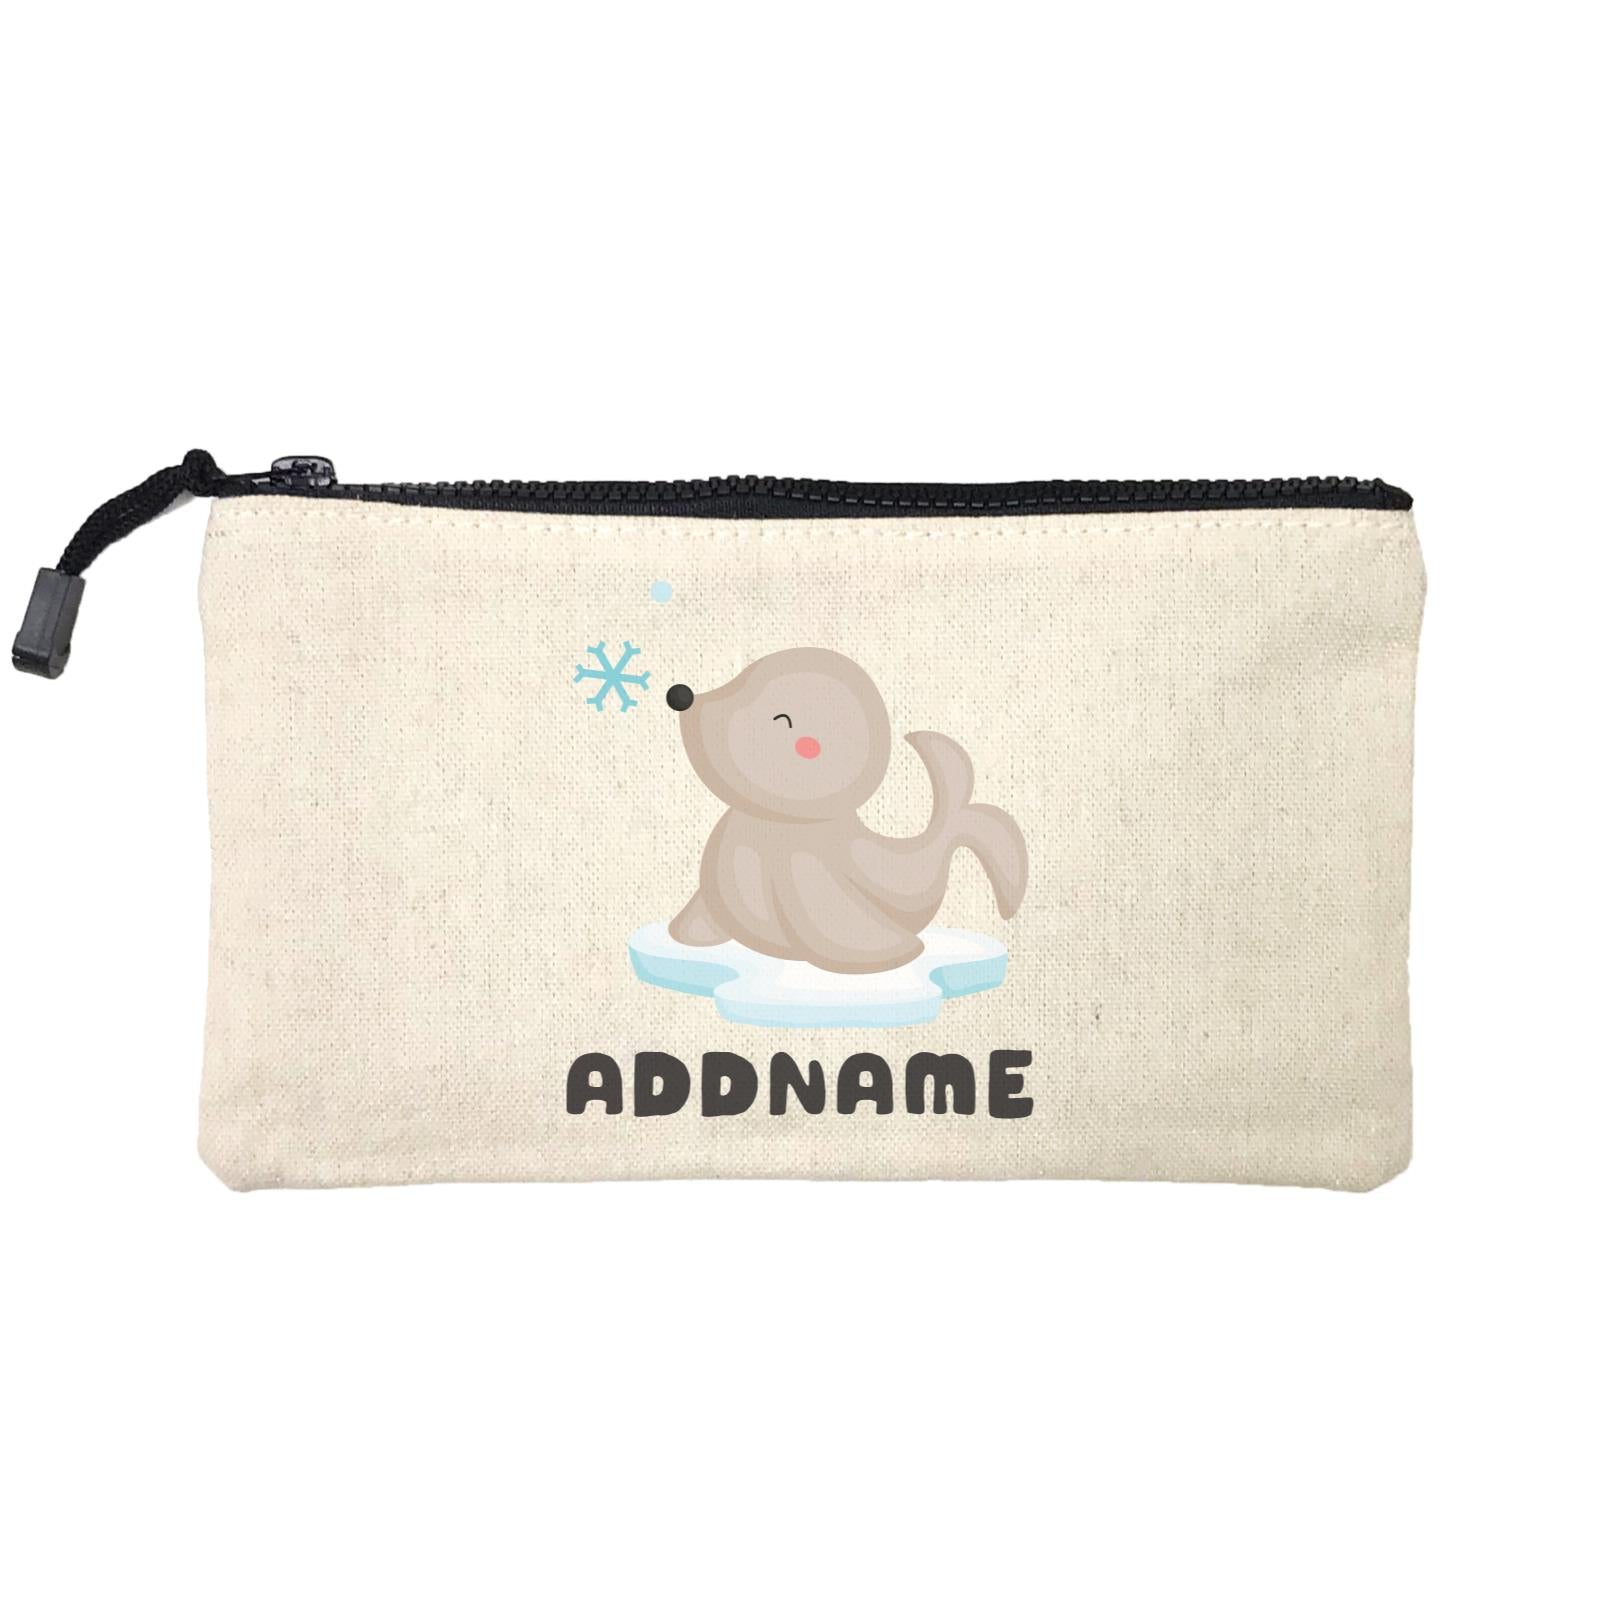 Birthday Winter Animals Happy Snow Seal Addname Mini Accessories Stationery Pouch